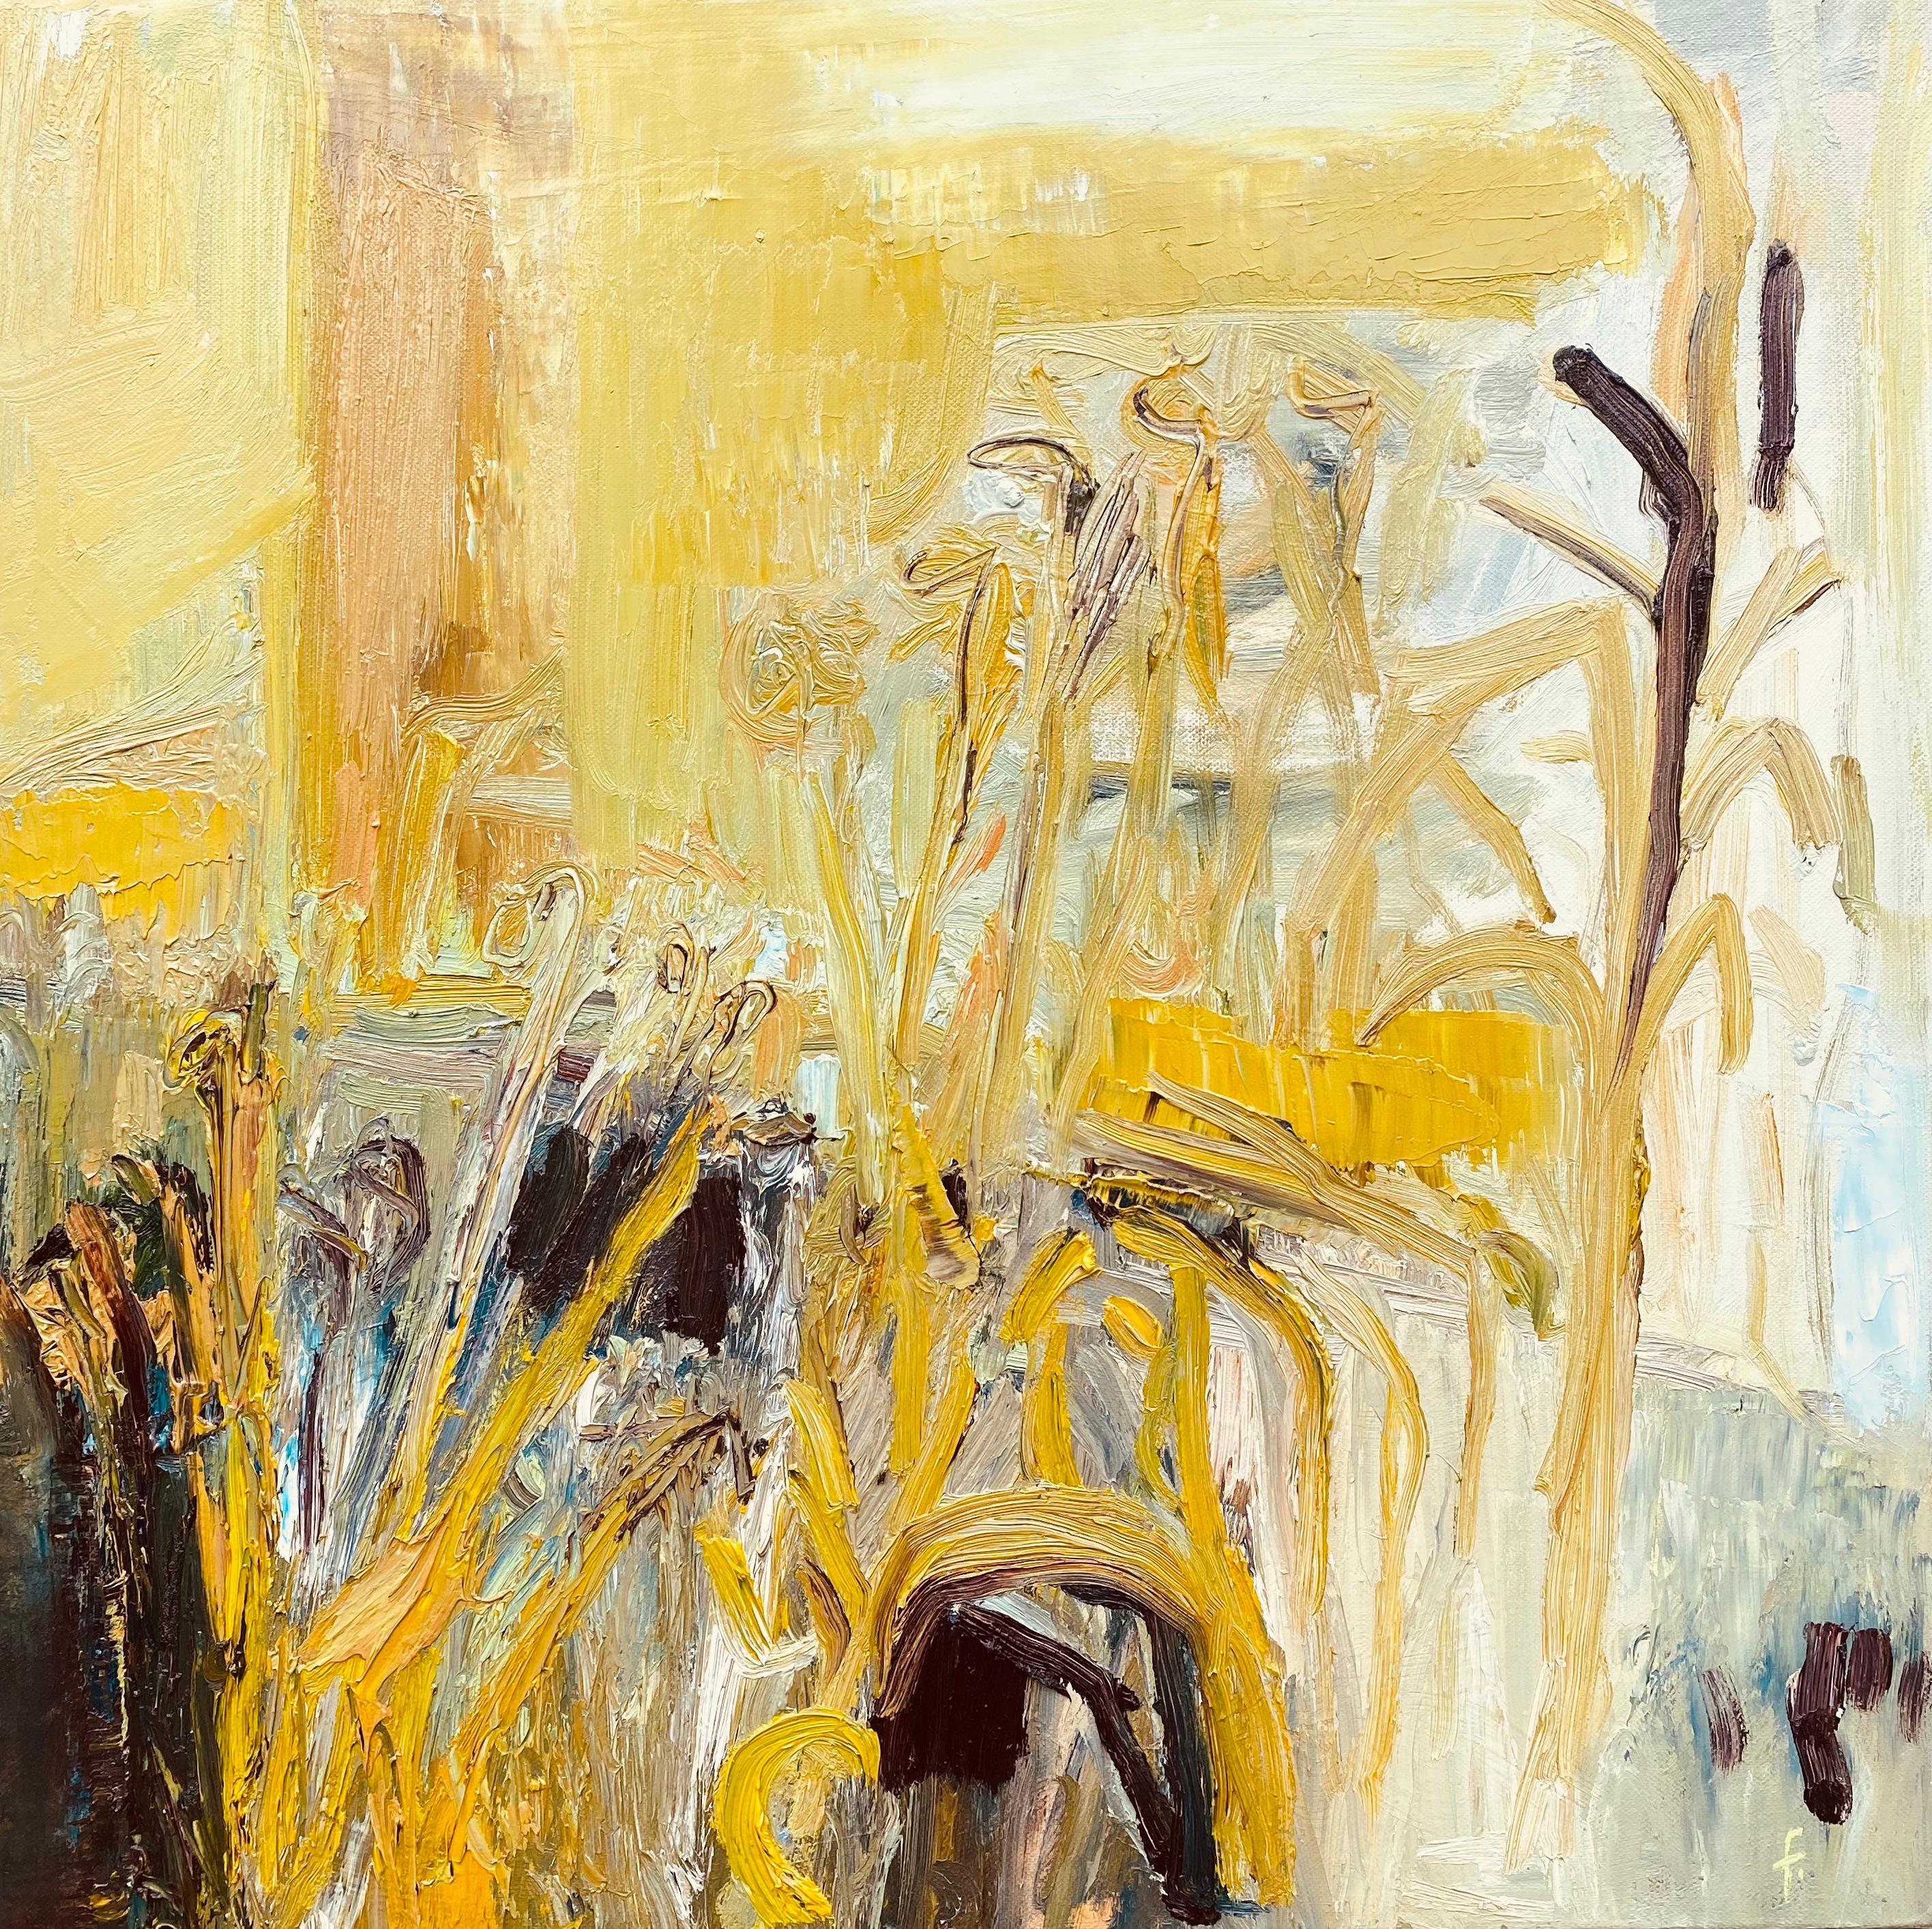 FRANCESCA OWEN  Landscape Painting - The Fields Turn Golden. Abstract Expressionist Oil Painting